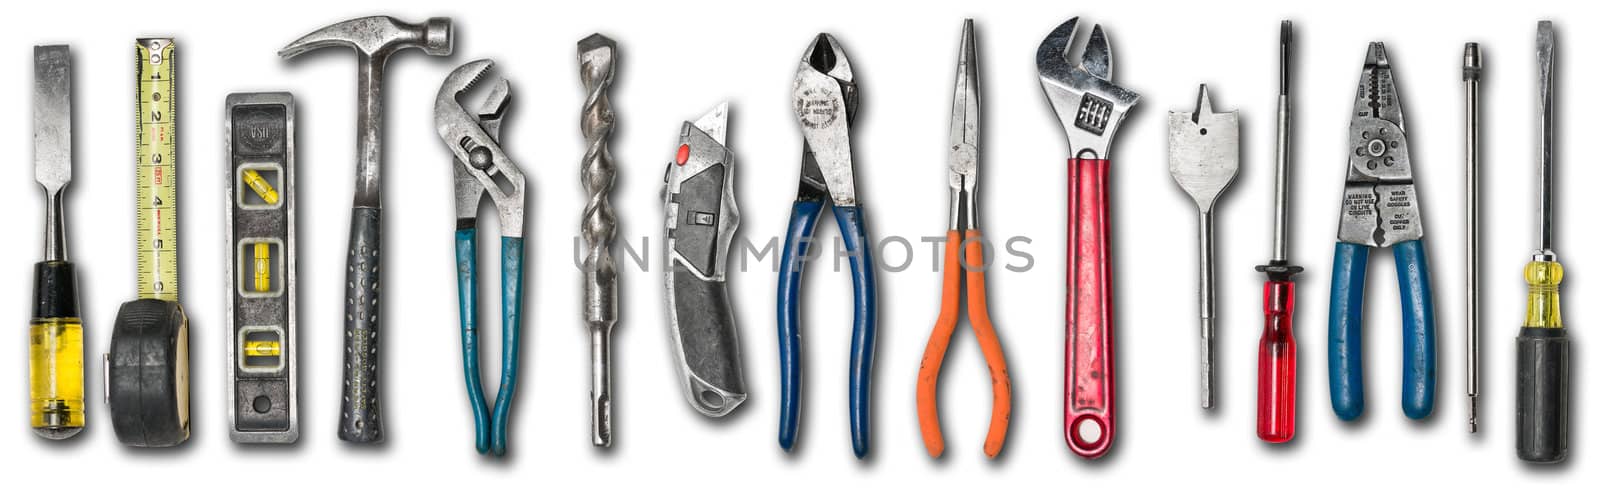 Various used tools on white background by Shane9